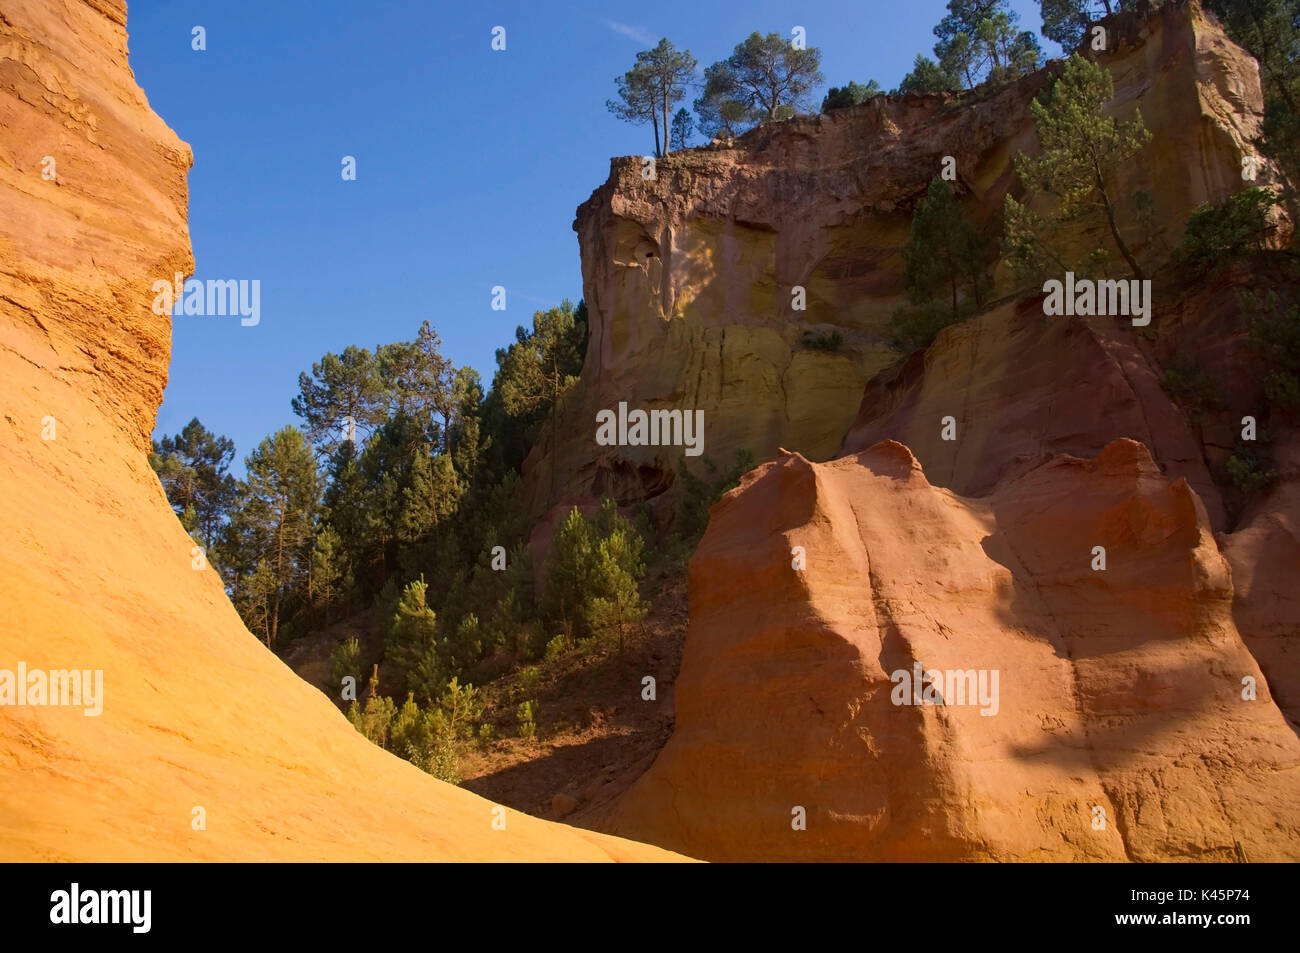 Europe, France, Luberon region, Roussillon district. The biggest ochre deposits in the world. Stock Photo